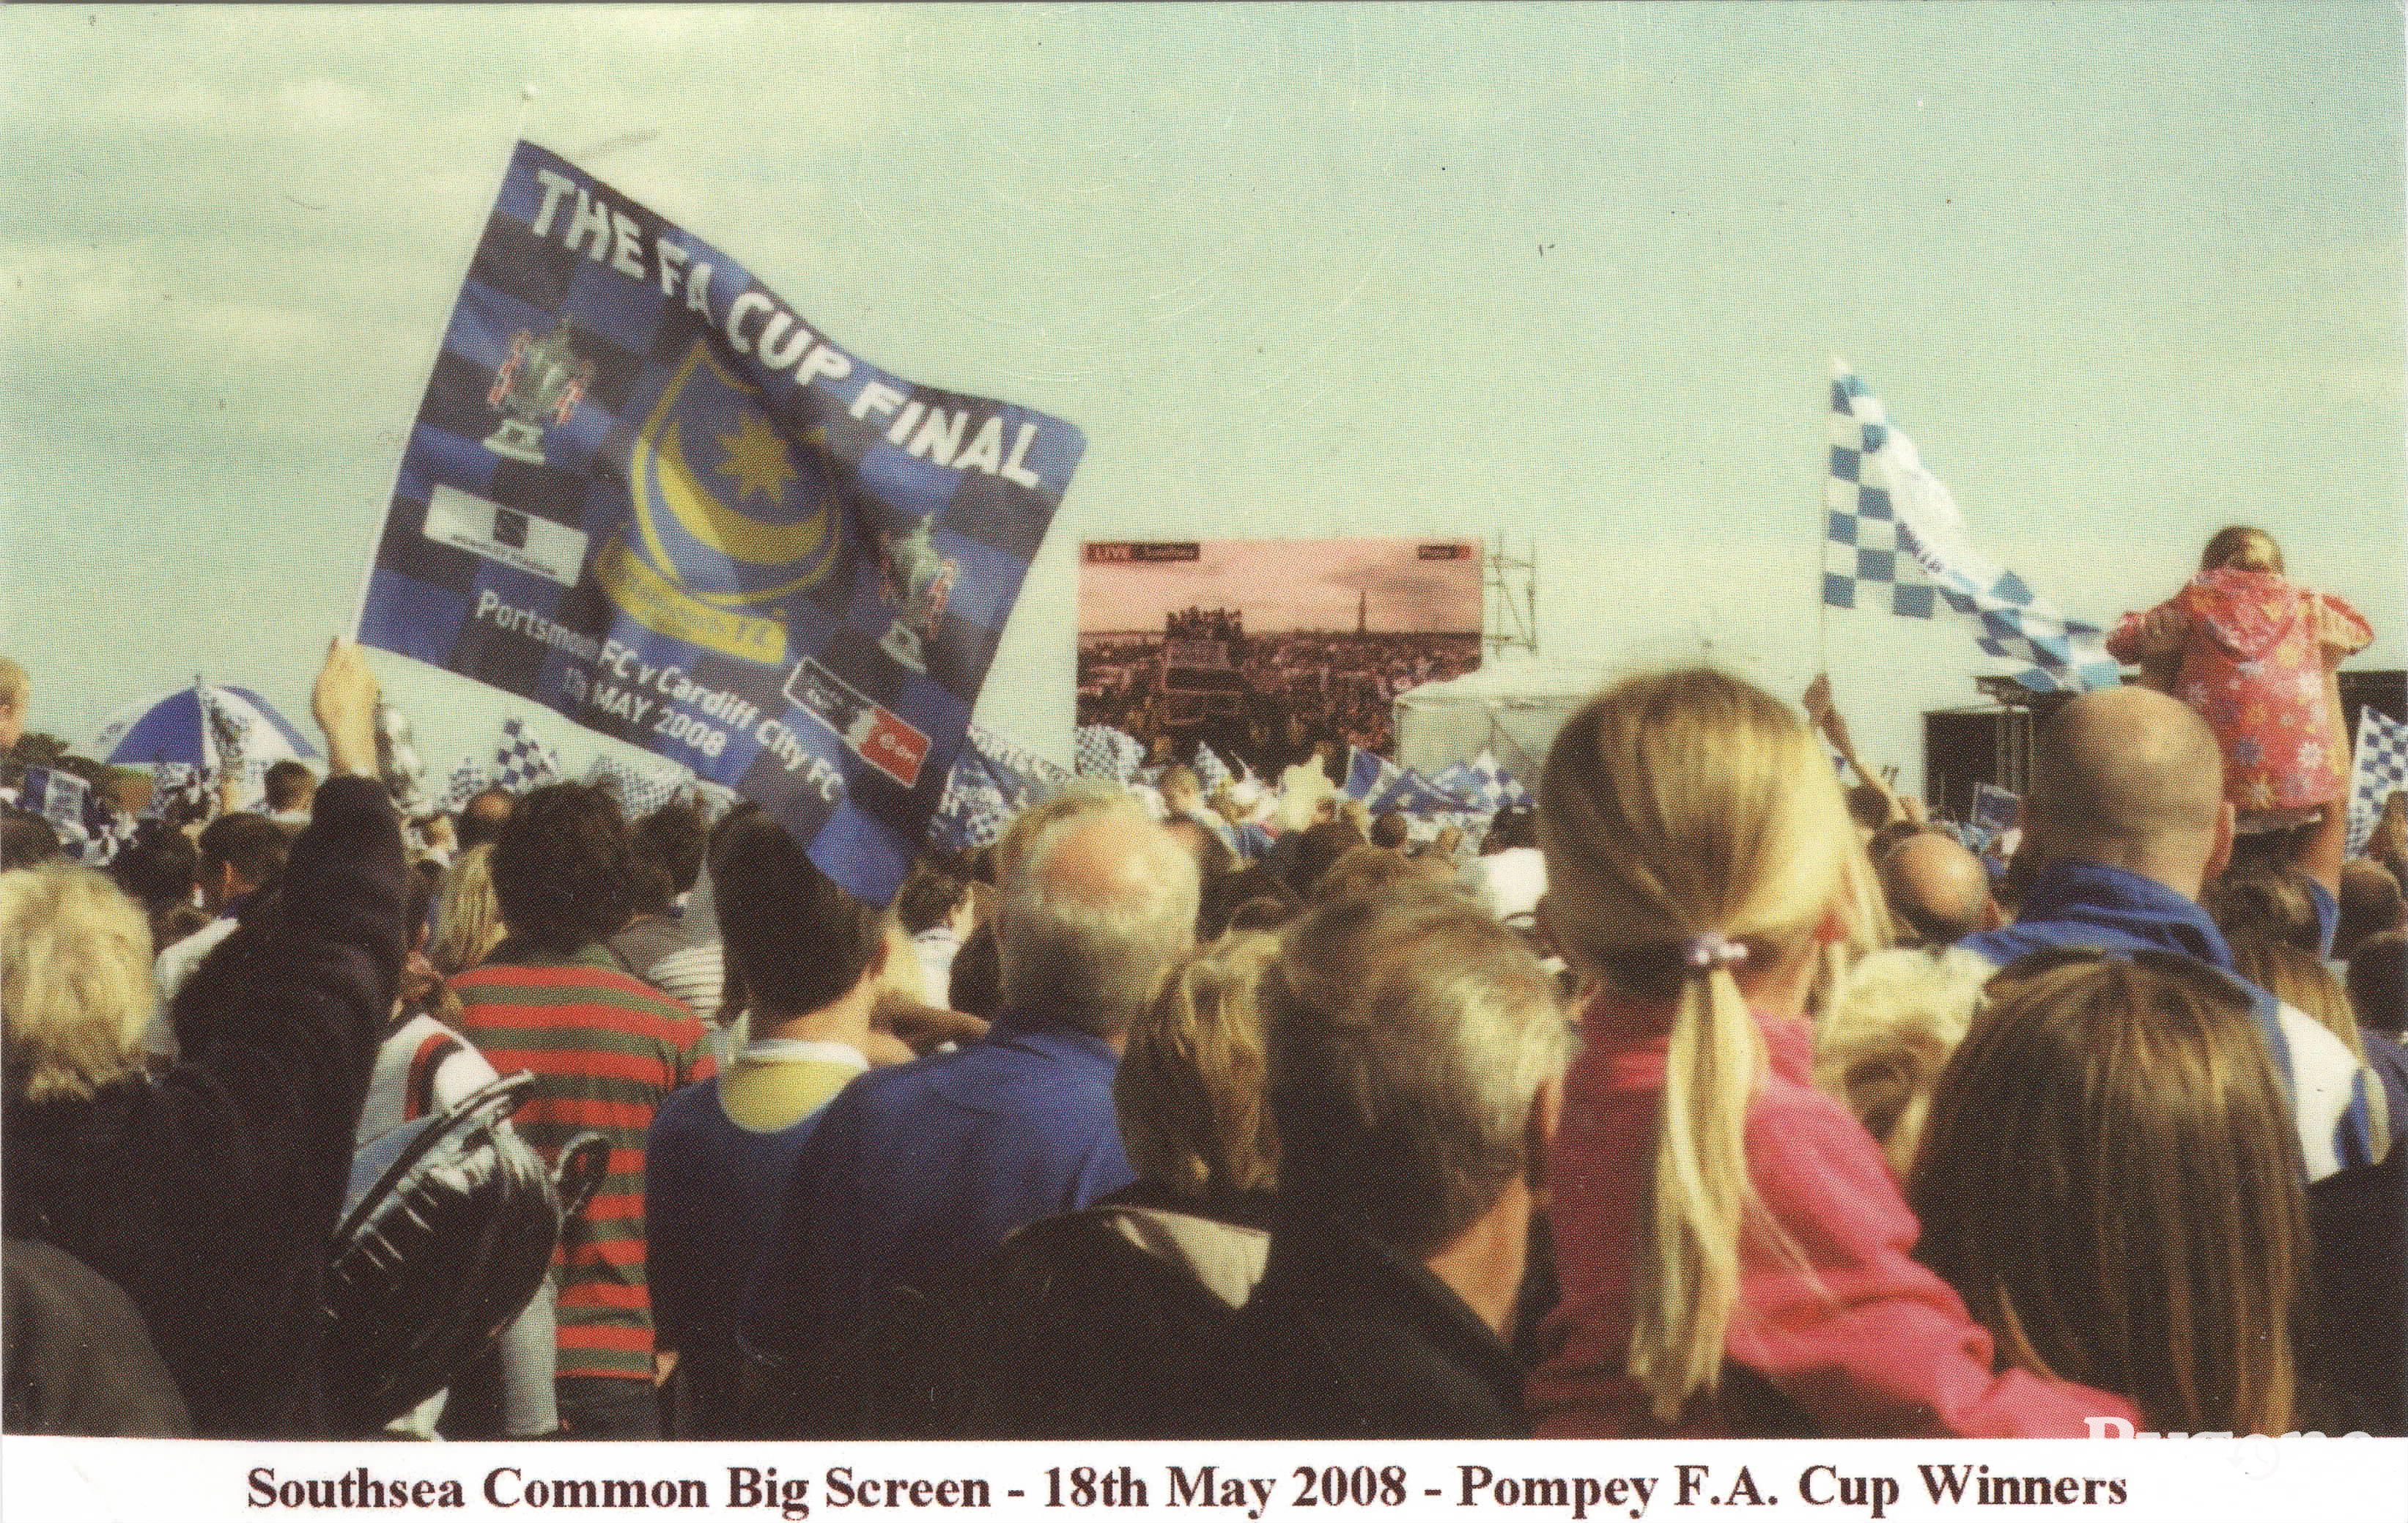 Southsea Common Big Screen - 18th May 2008 - Pompey F.A. Cup Winners.